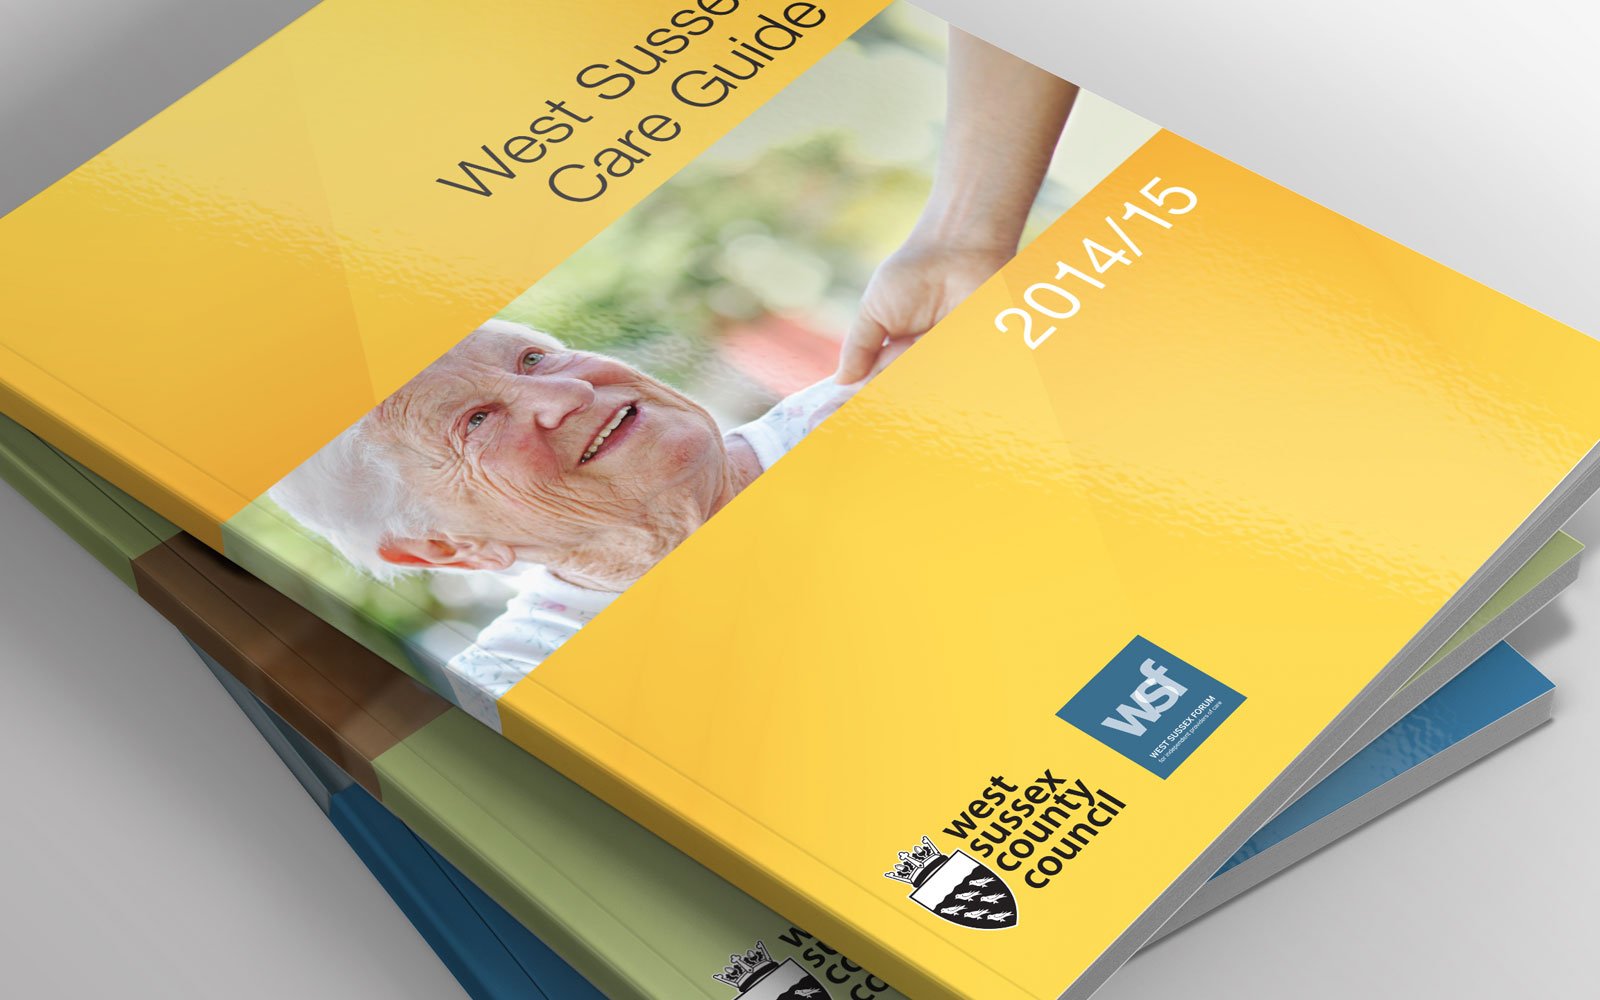 The official West Sussex Care Guide – new 2015/16 edition coming soon!